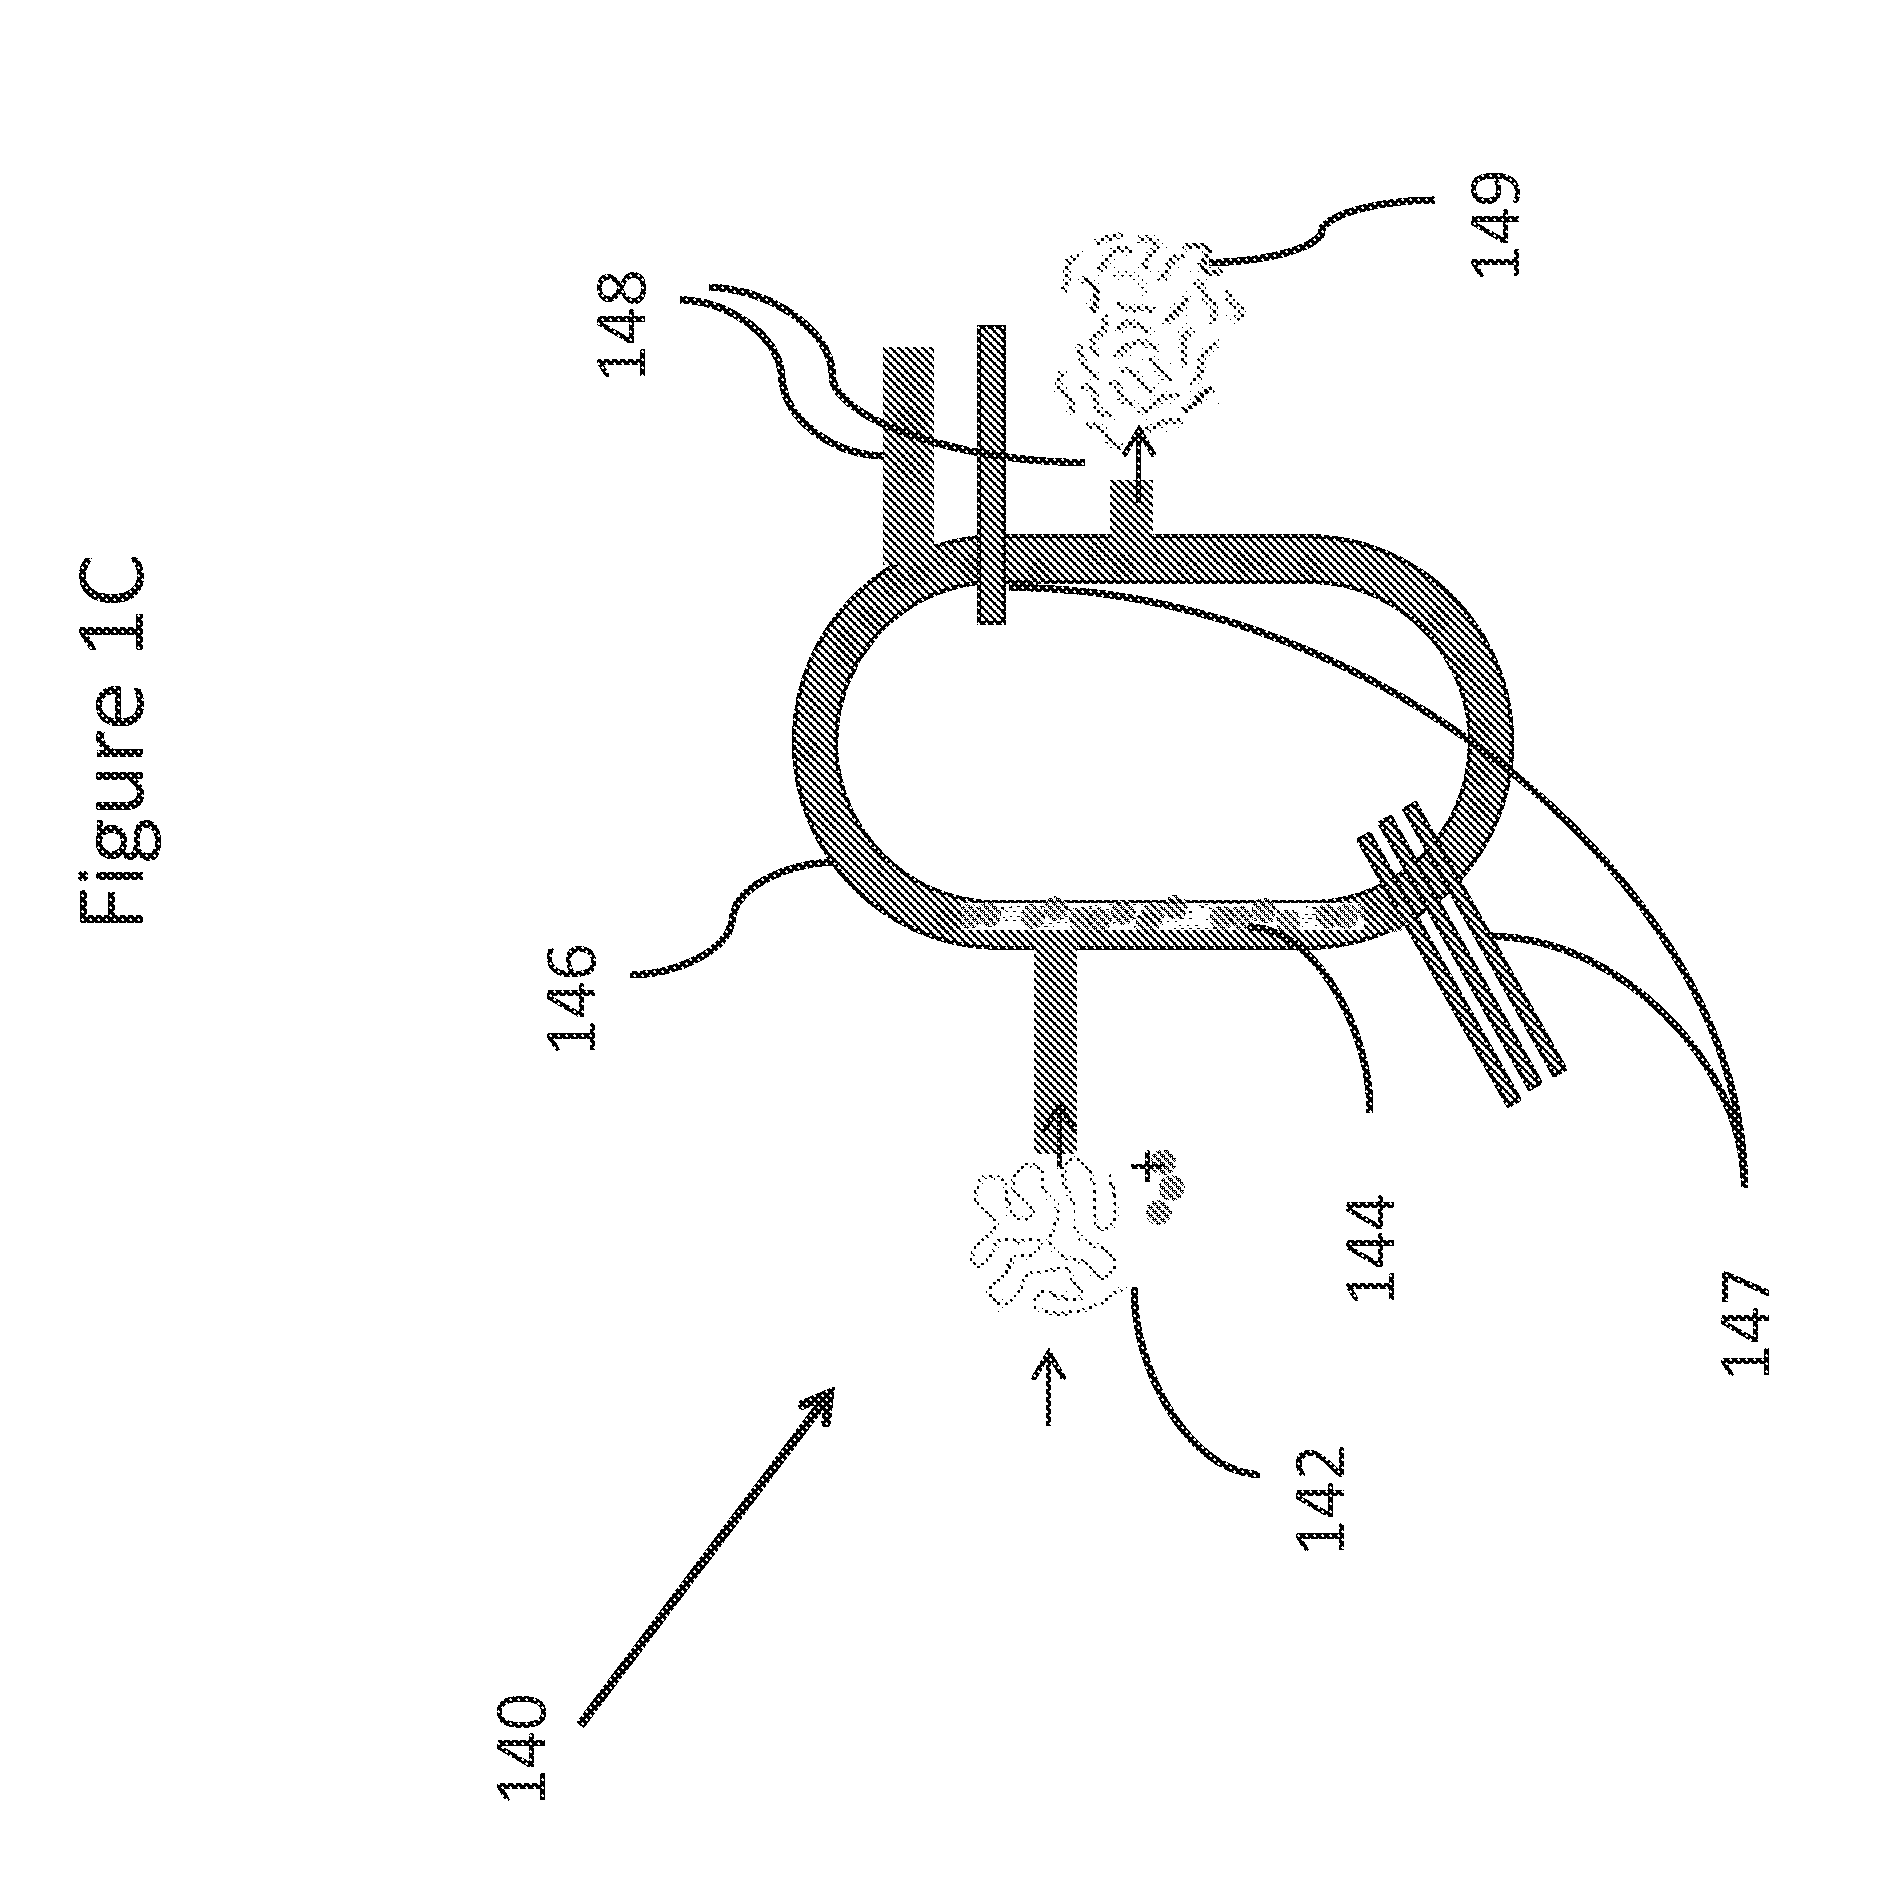 Systems and methods for genetic and biological analysis